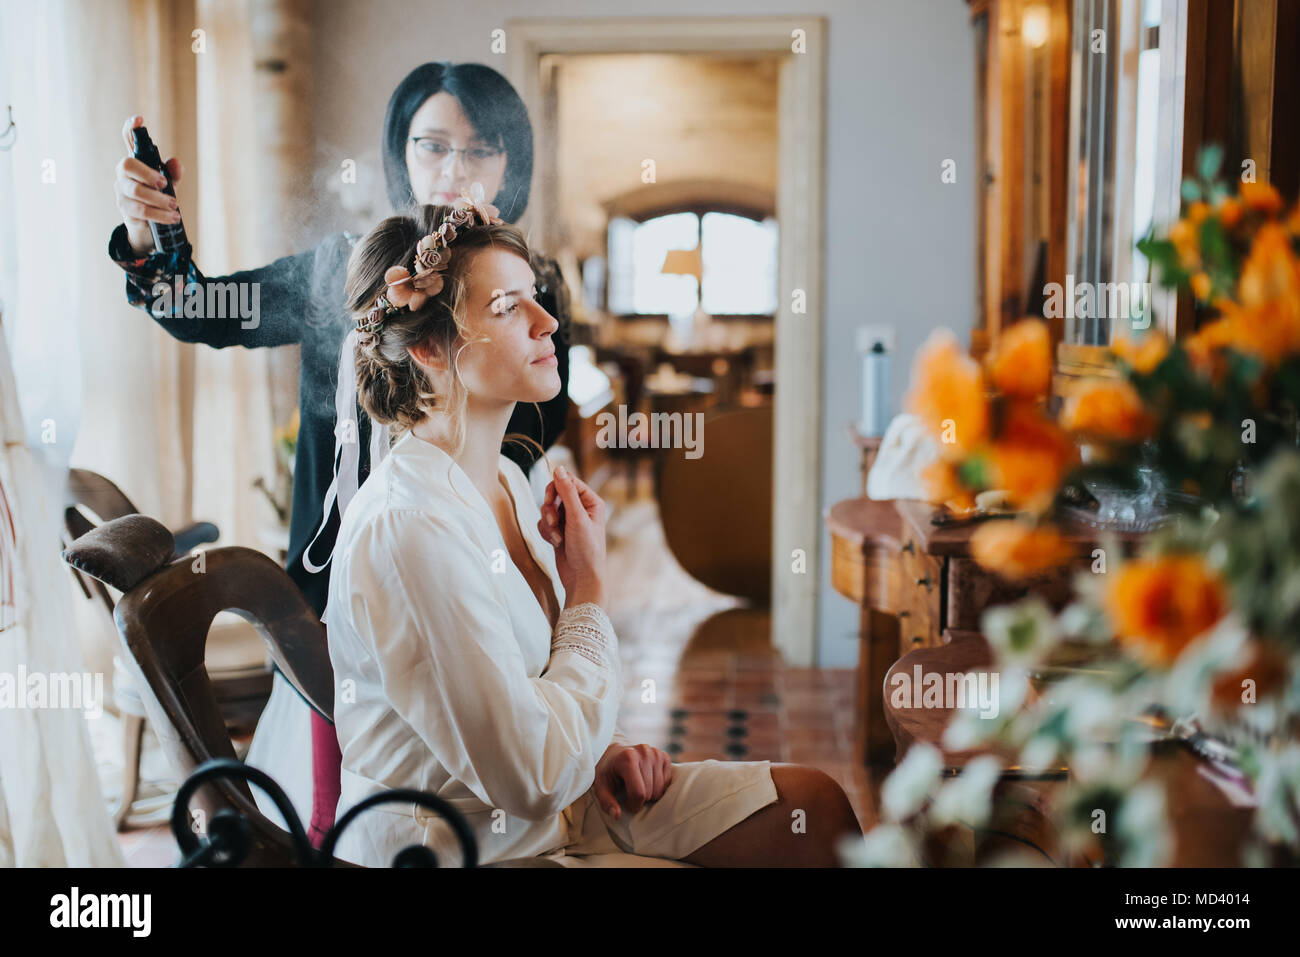 Bride preparing for wedding with hairstylist Stock Photo